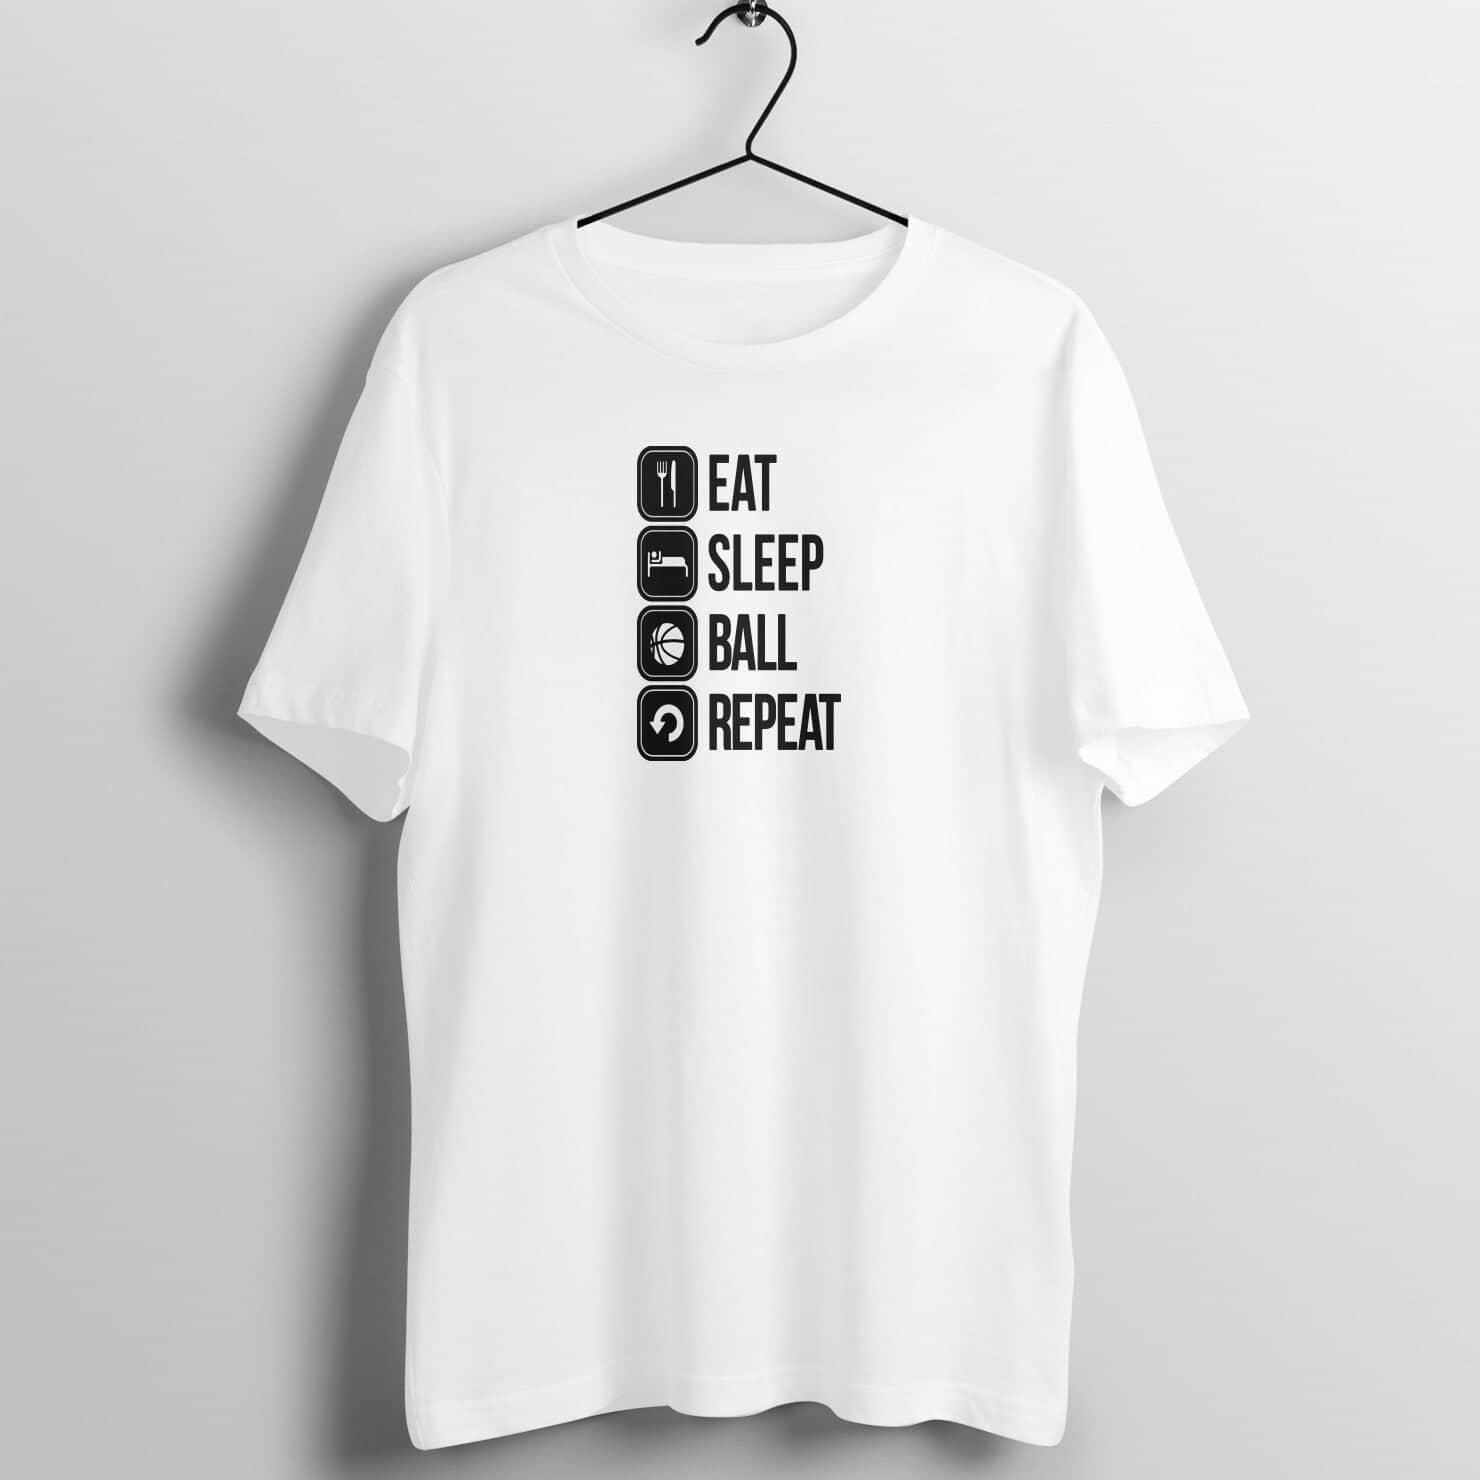 Eat Sleep Ball Repeat Exclusive White T Shirt for Baller Men and Women Printrove White S 